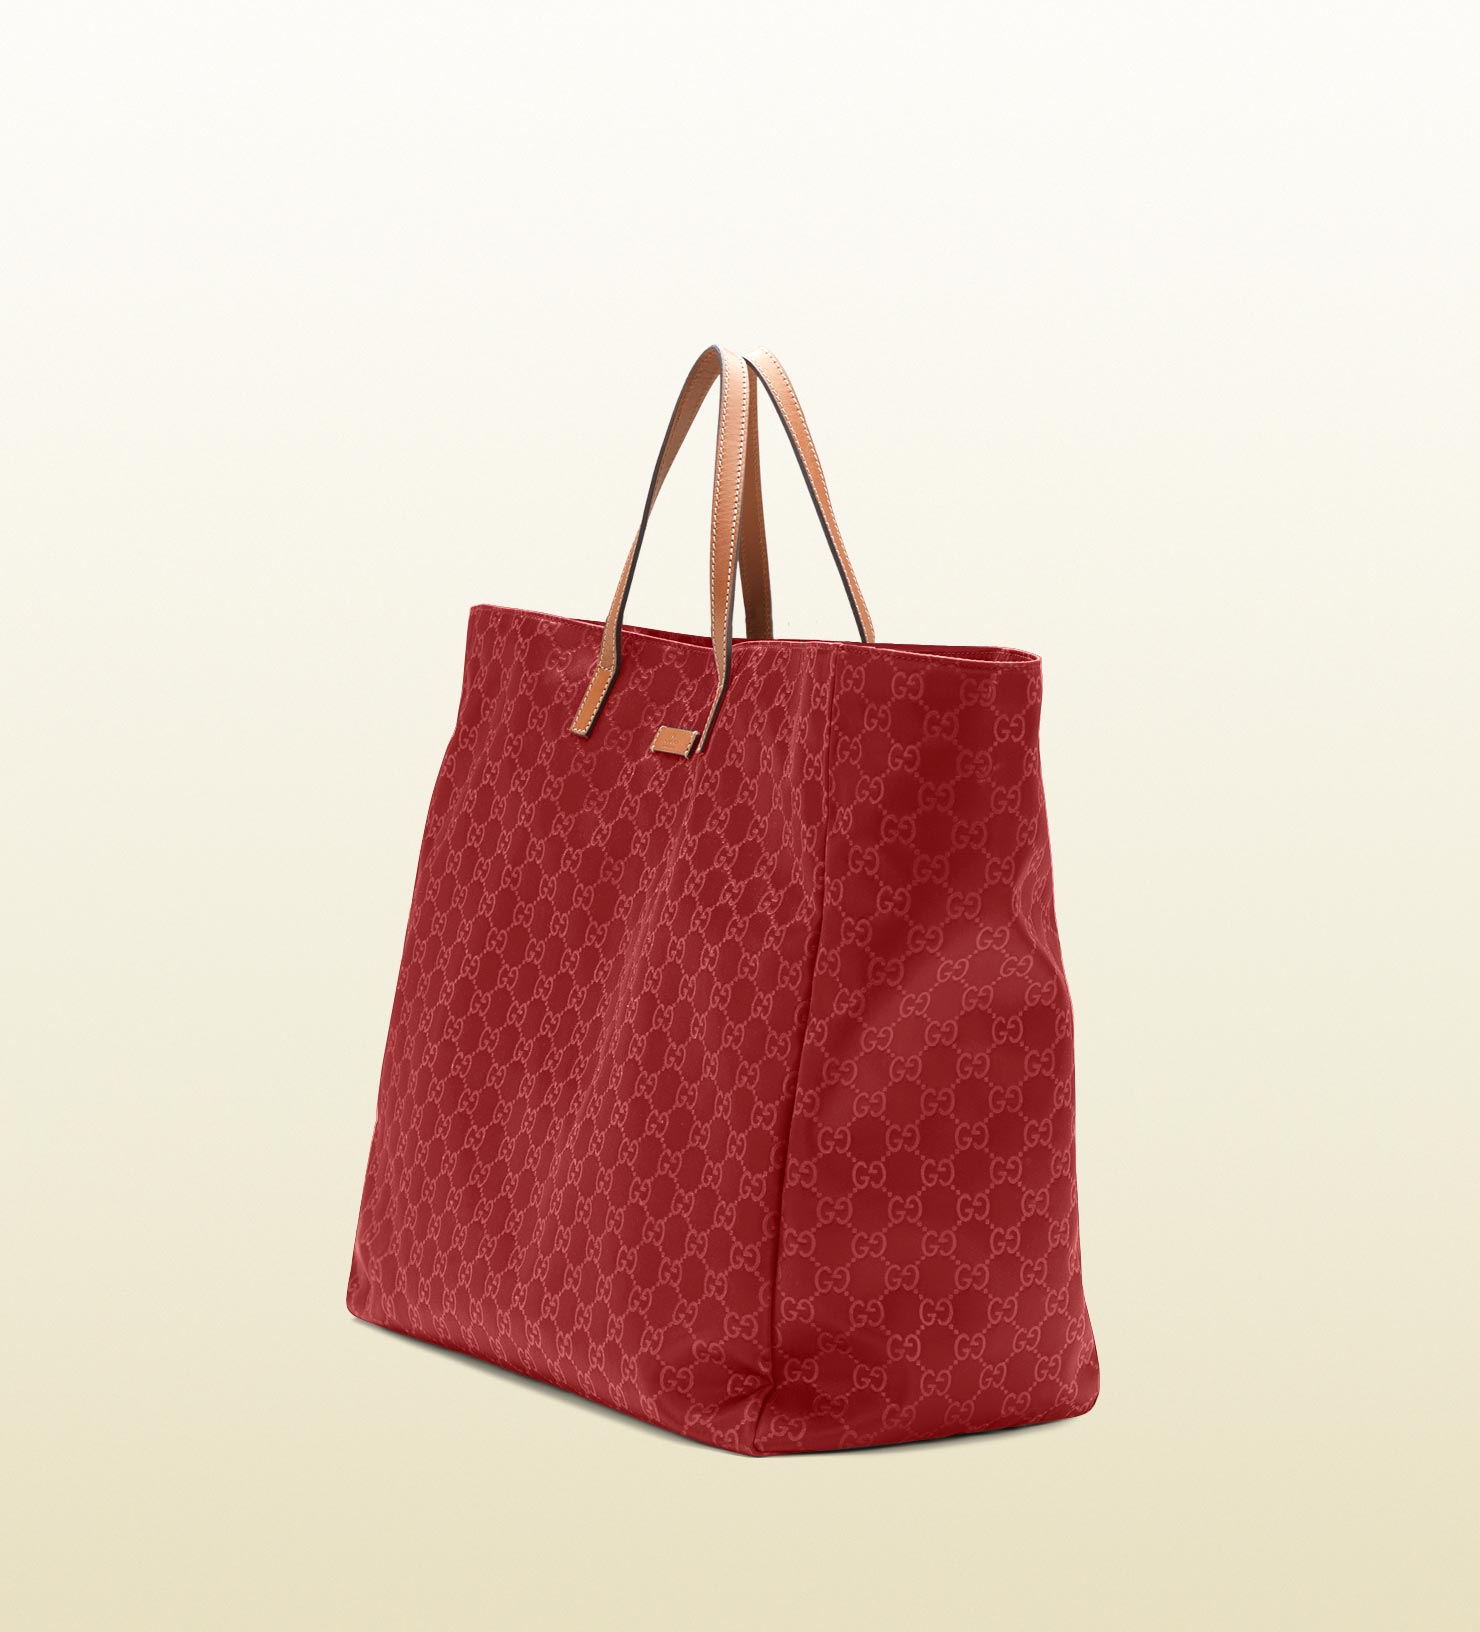 Lyst - Gucci Tote Bag in Red for Men